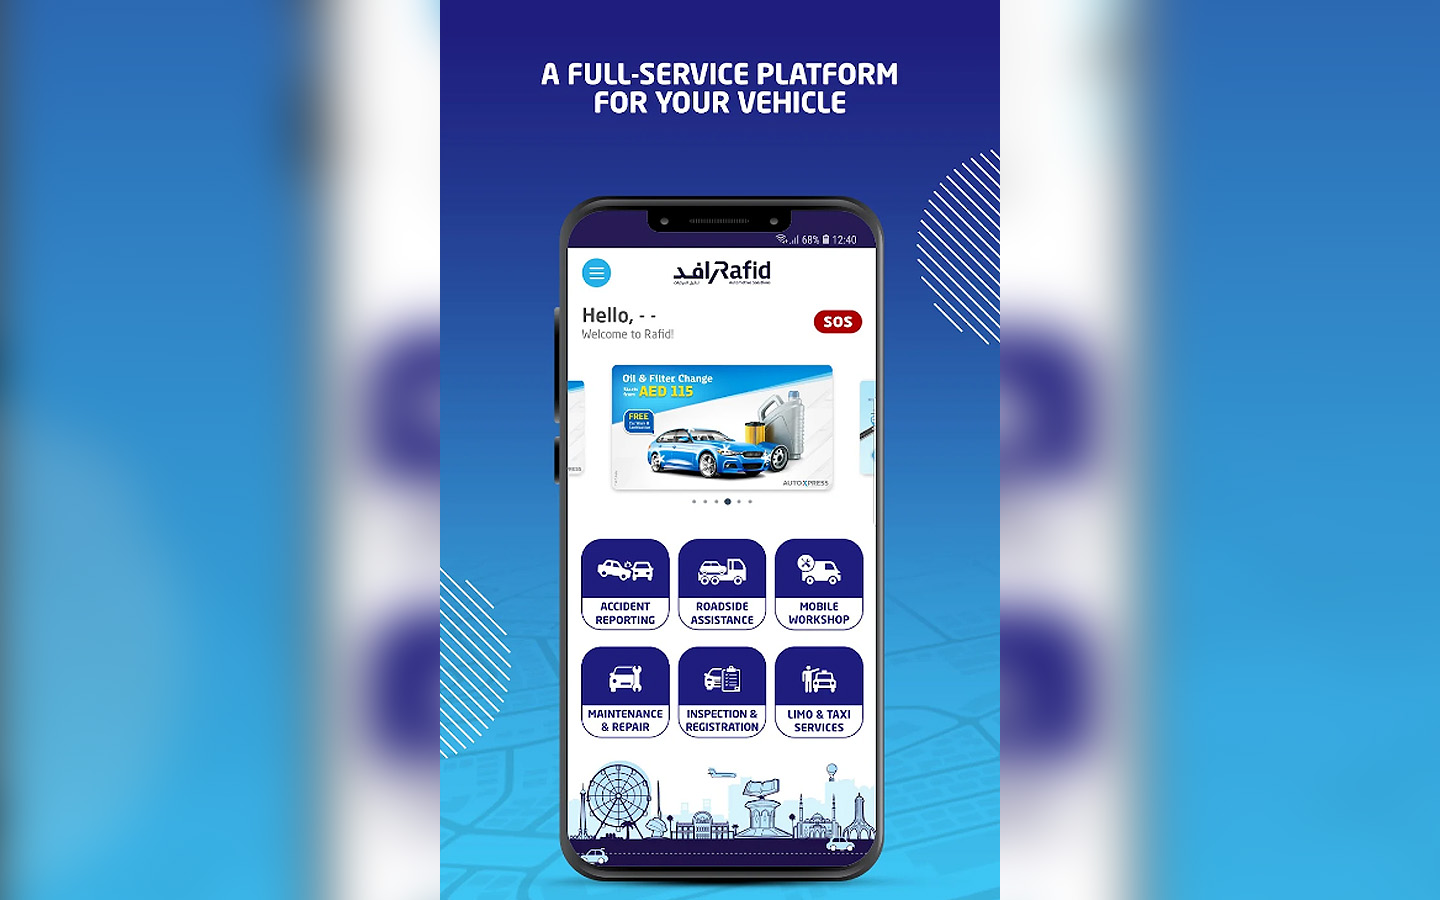 Rafid app gives accident report in 15 minutes of reporting an accident